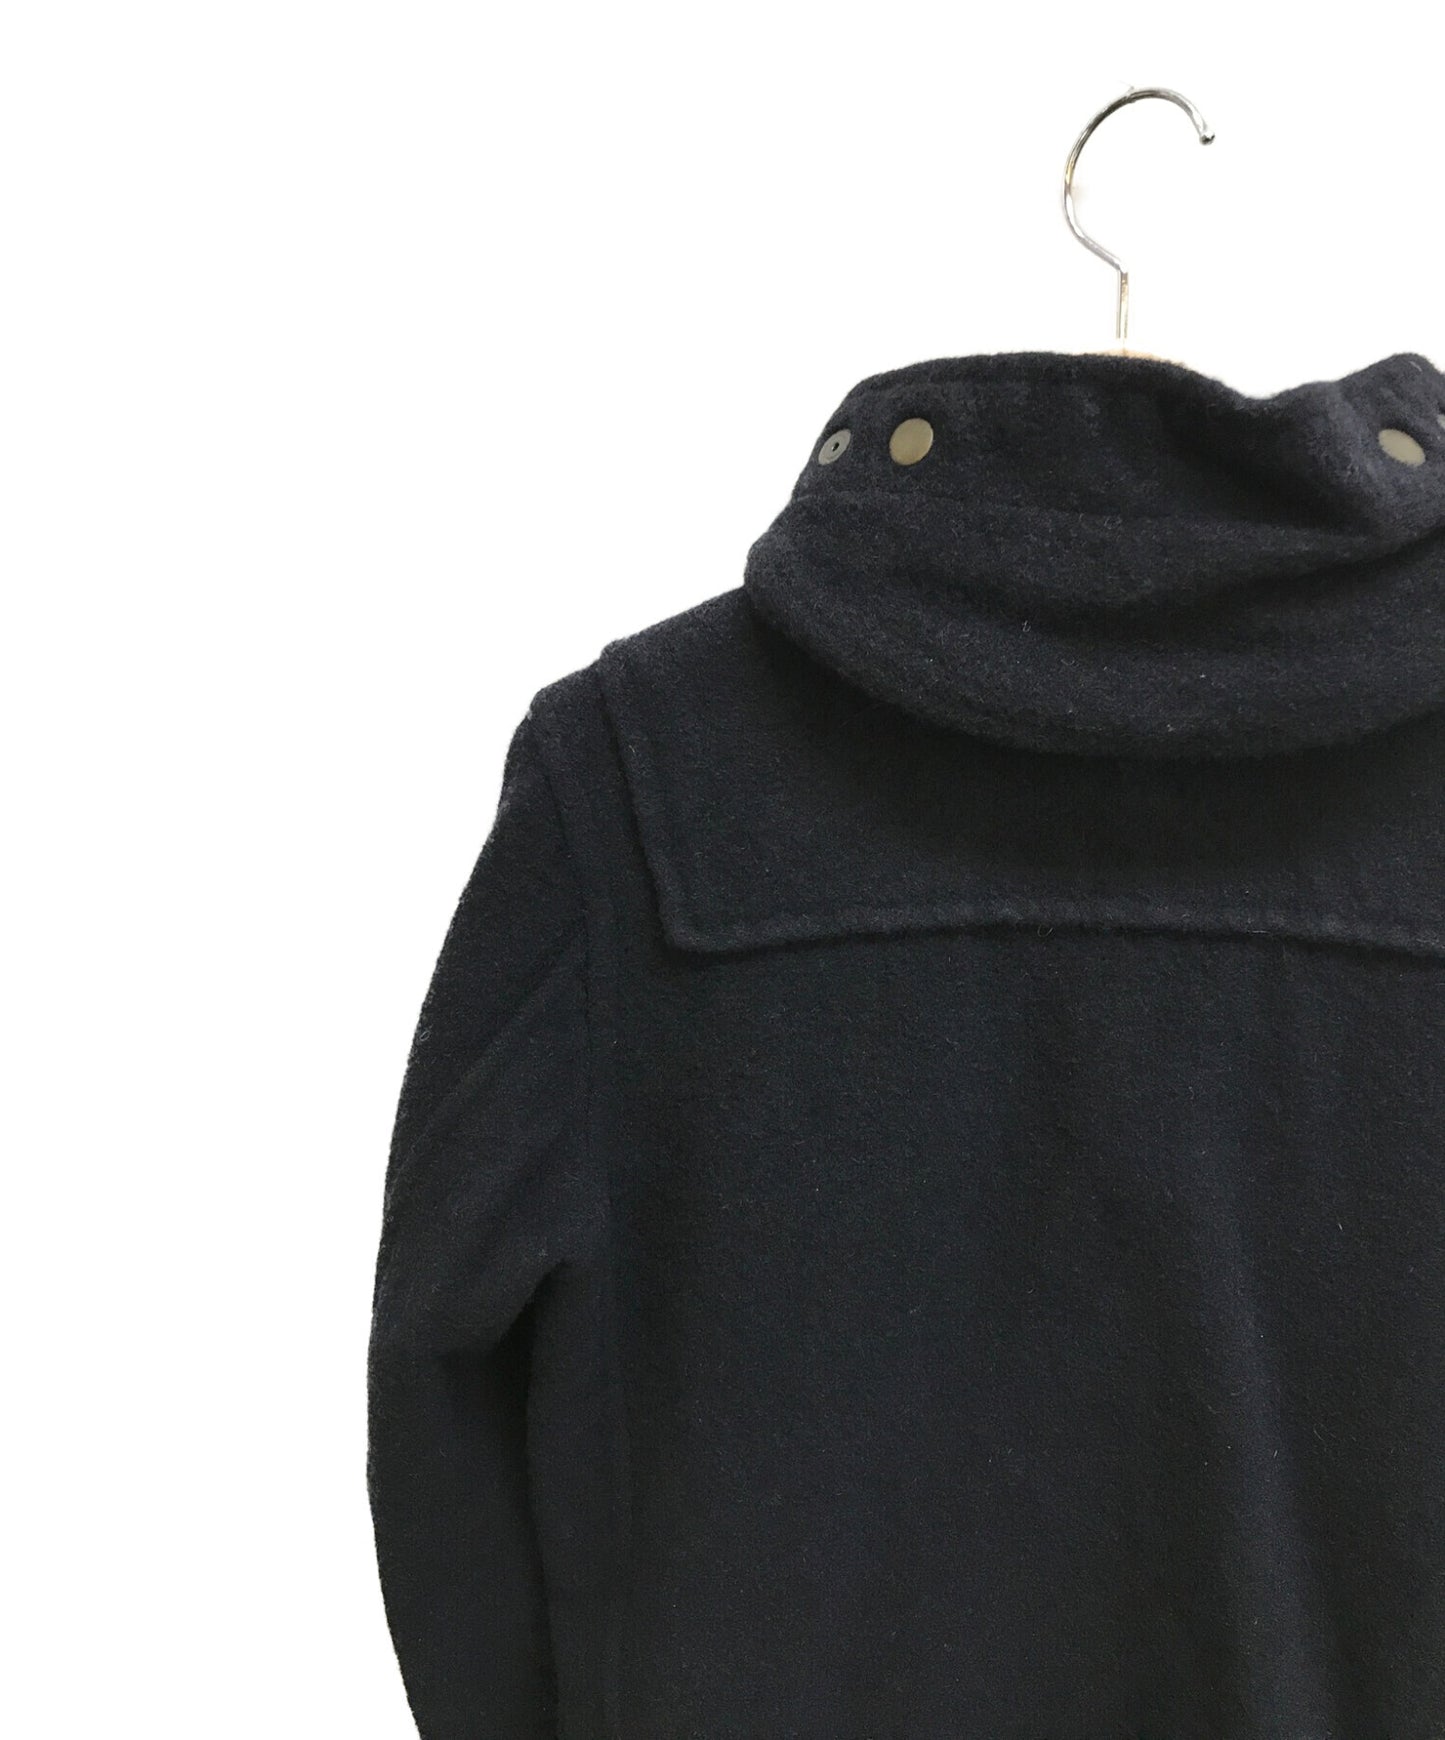 Comme des Garcons Homme X Gloverall Duffle外套HL-C015